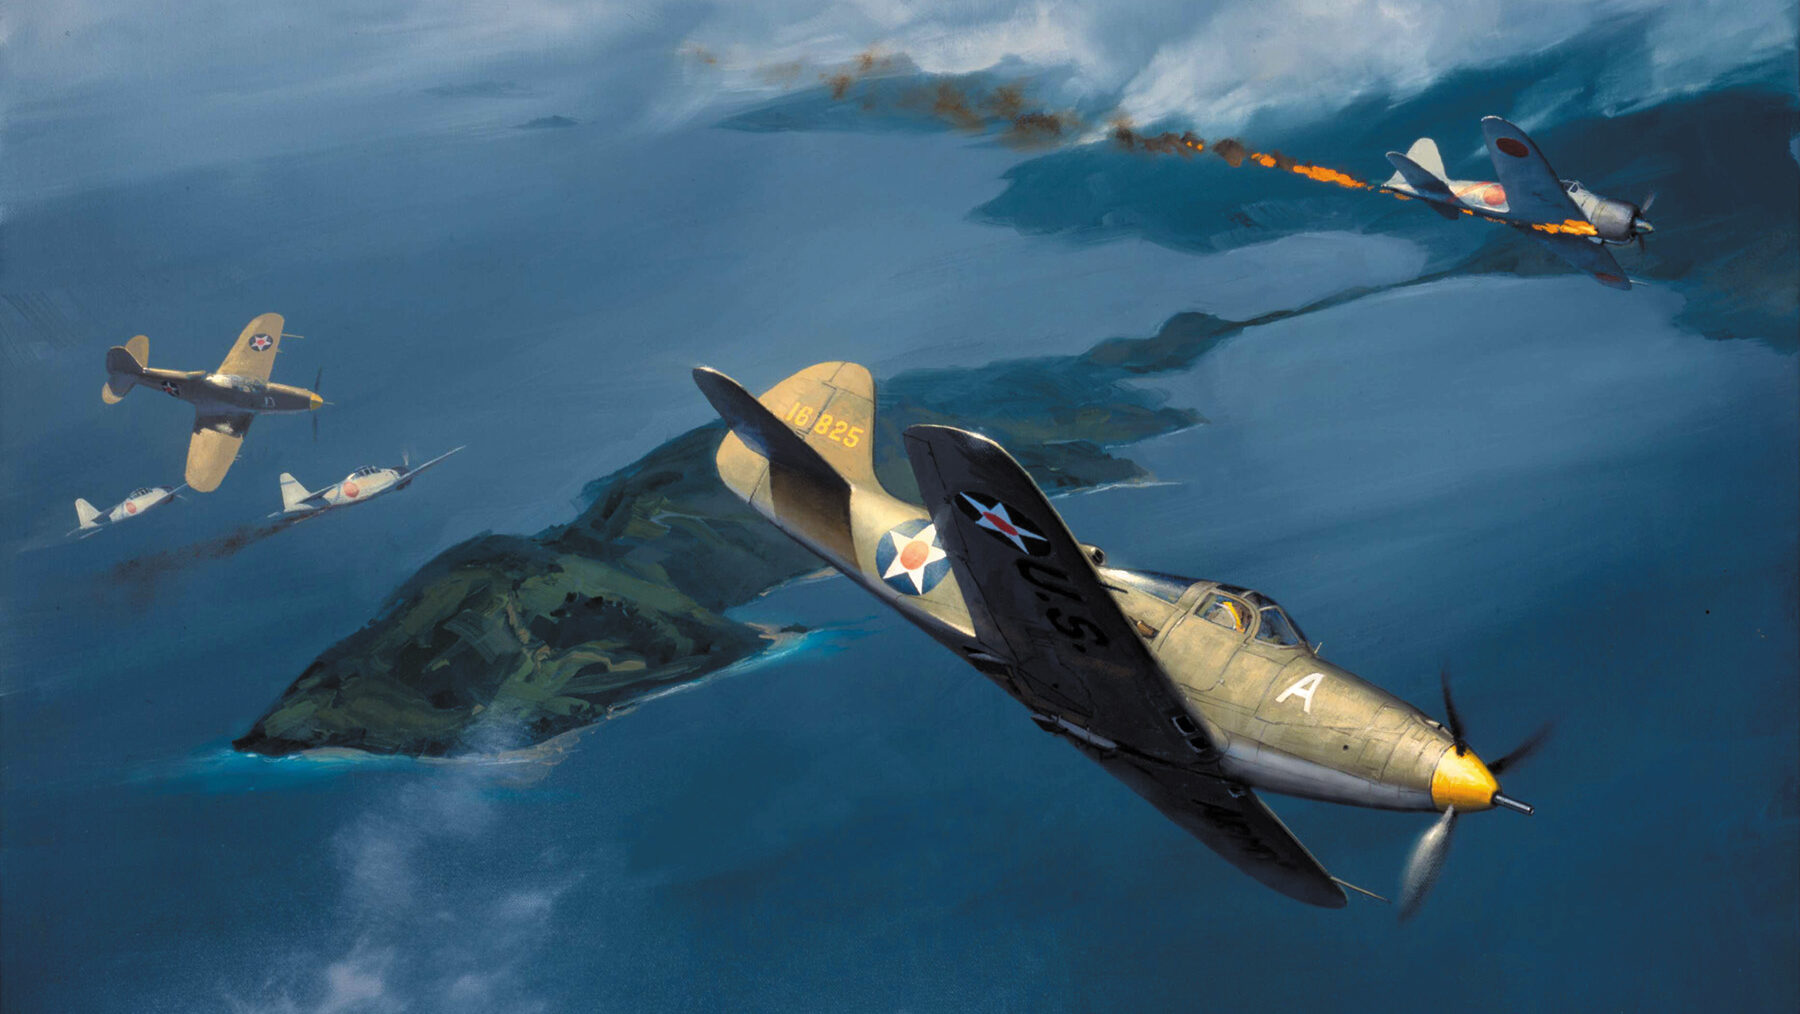 In this painting by Jack Fellows, P-39s flown by Major George Greene, Jr., (foreground) and “Buzz” Wagner take on Japanese Zeros over the Salamaua Peninsula.